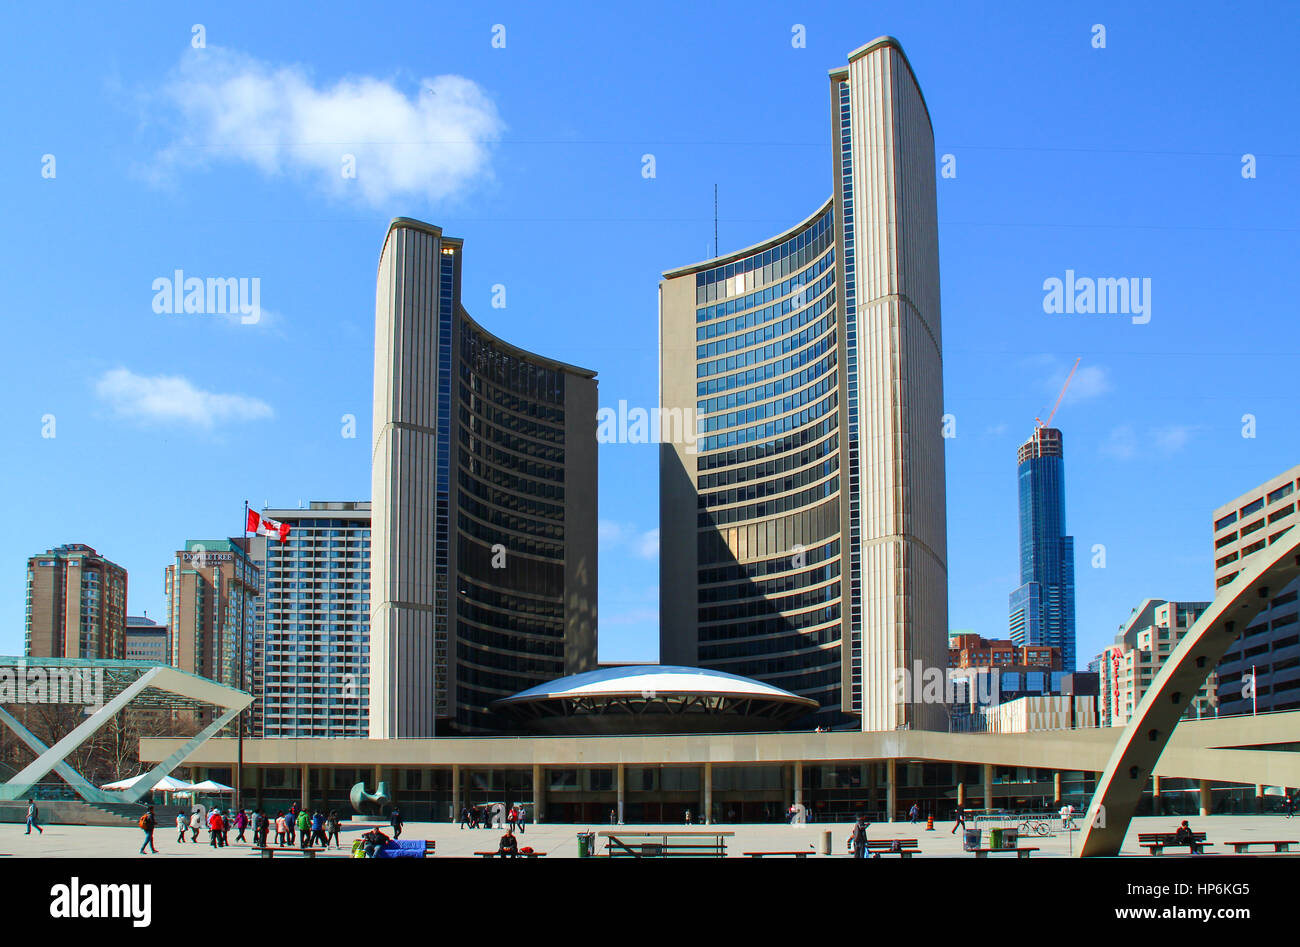 TORONTO, CANADA - April 22 2014: The Toronto City Hall, or New City Hall, the municipal government of Toronto, Ontario, Canada, and one of the city's  Stock Photo